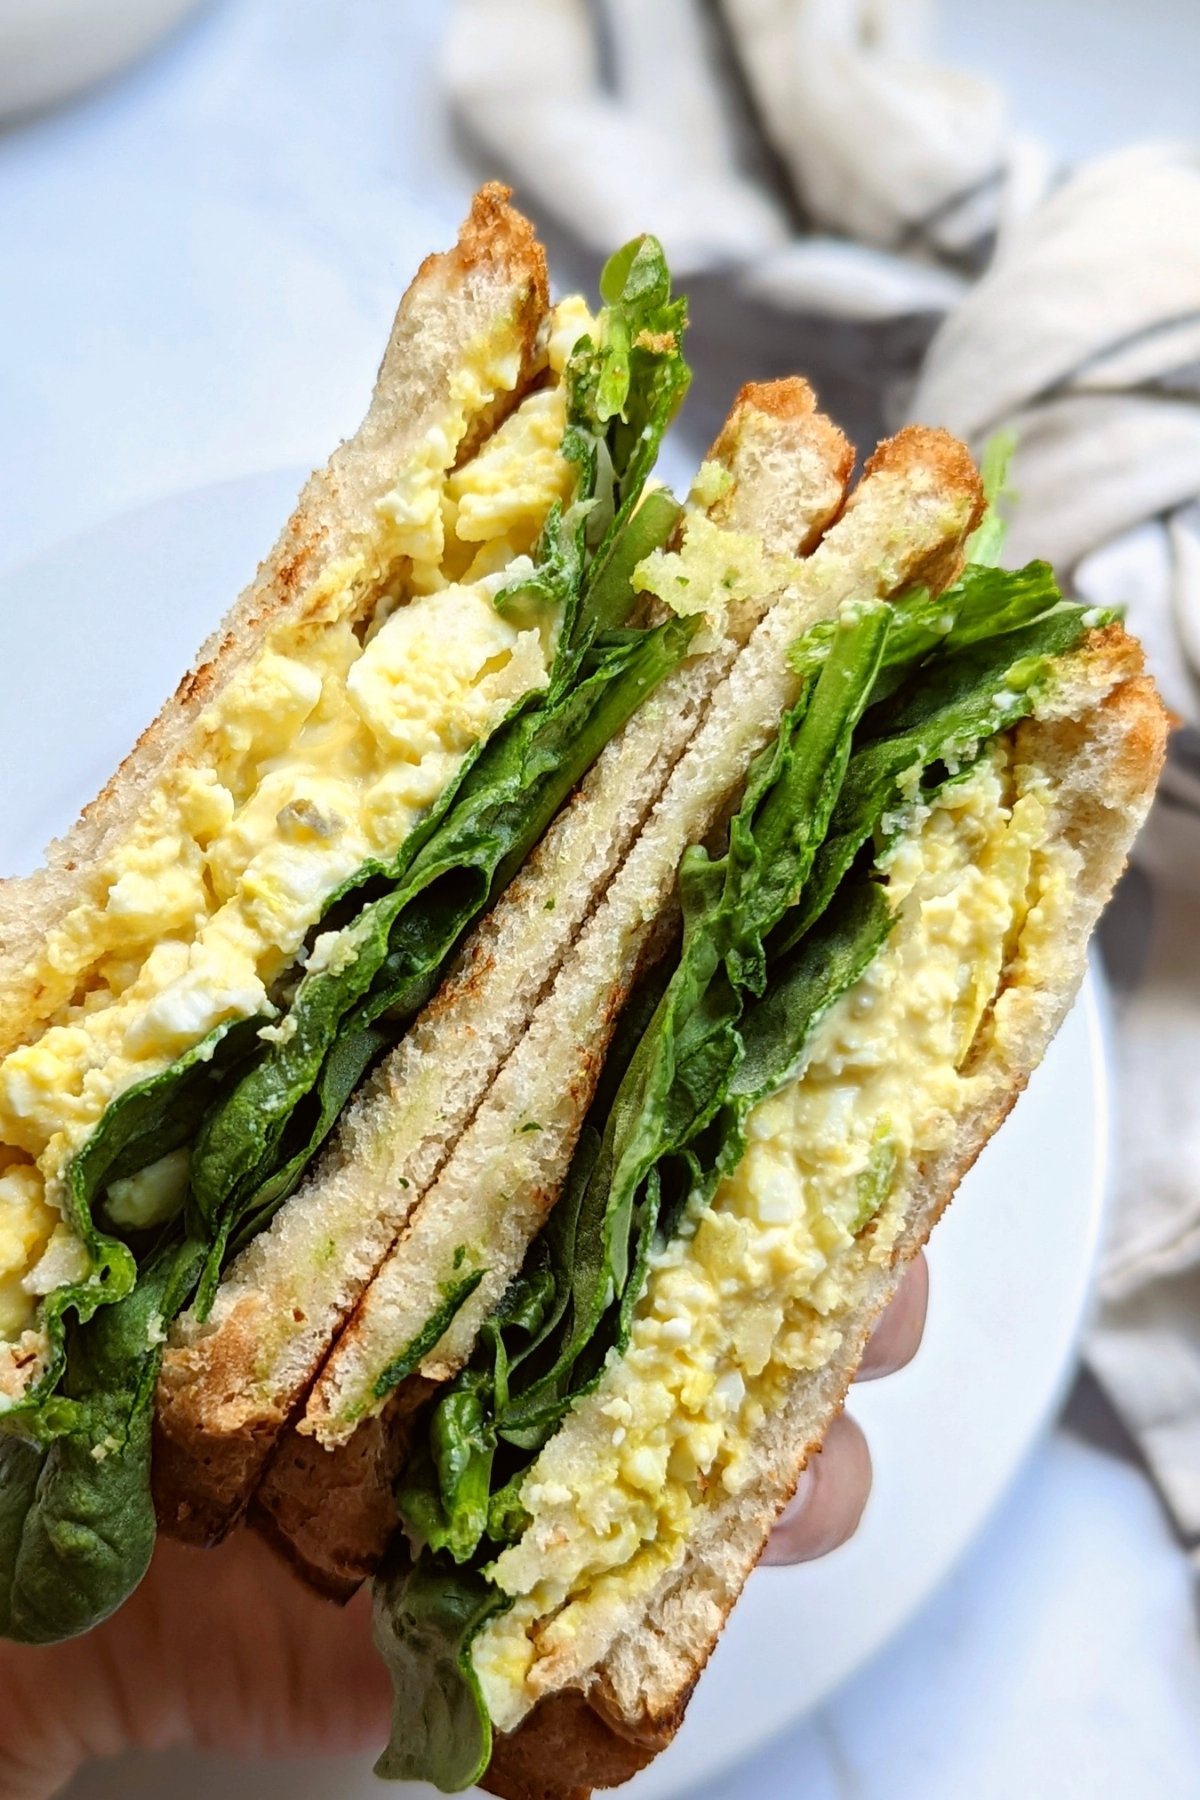 low sodium sandwich recipe with eggs without salt recipes healthy lunches no salt hearty healthy egg salad sandwich recipe